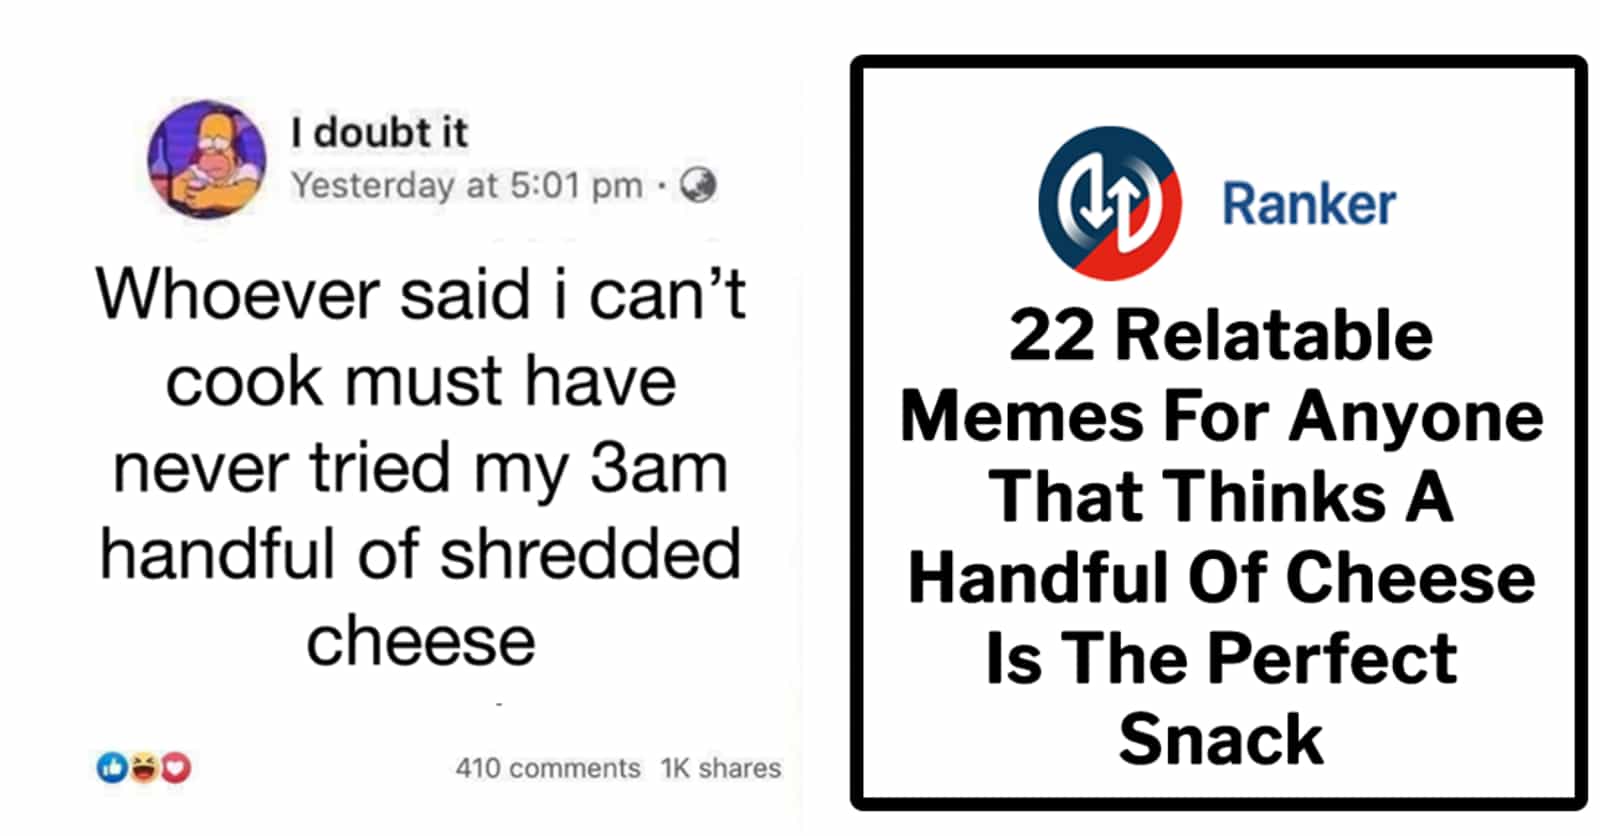 21 Relatable Memes For Anyone That Thinks A Fistful Of Shredded Cheese Is The Perfect Snack